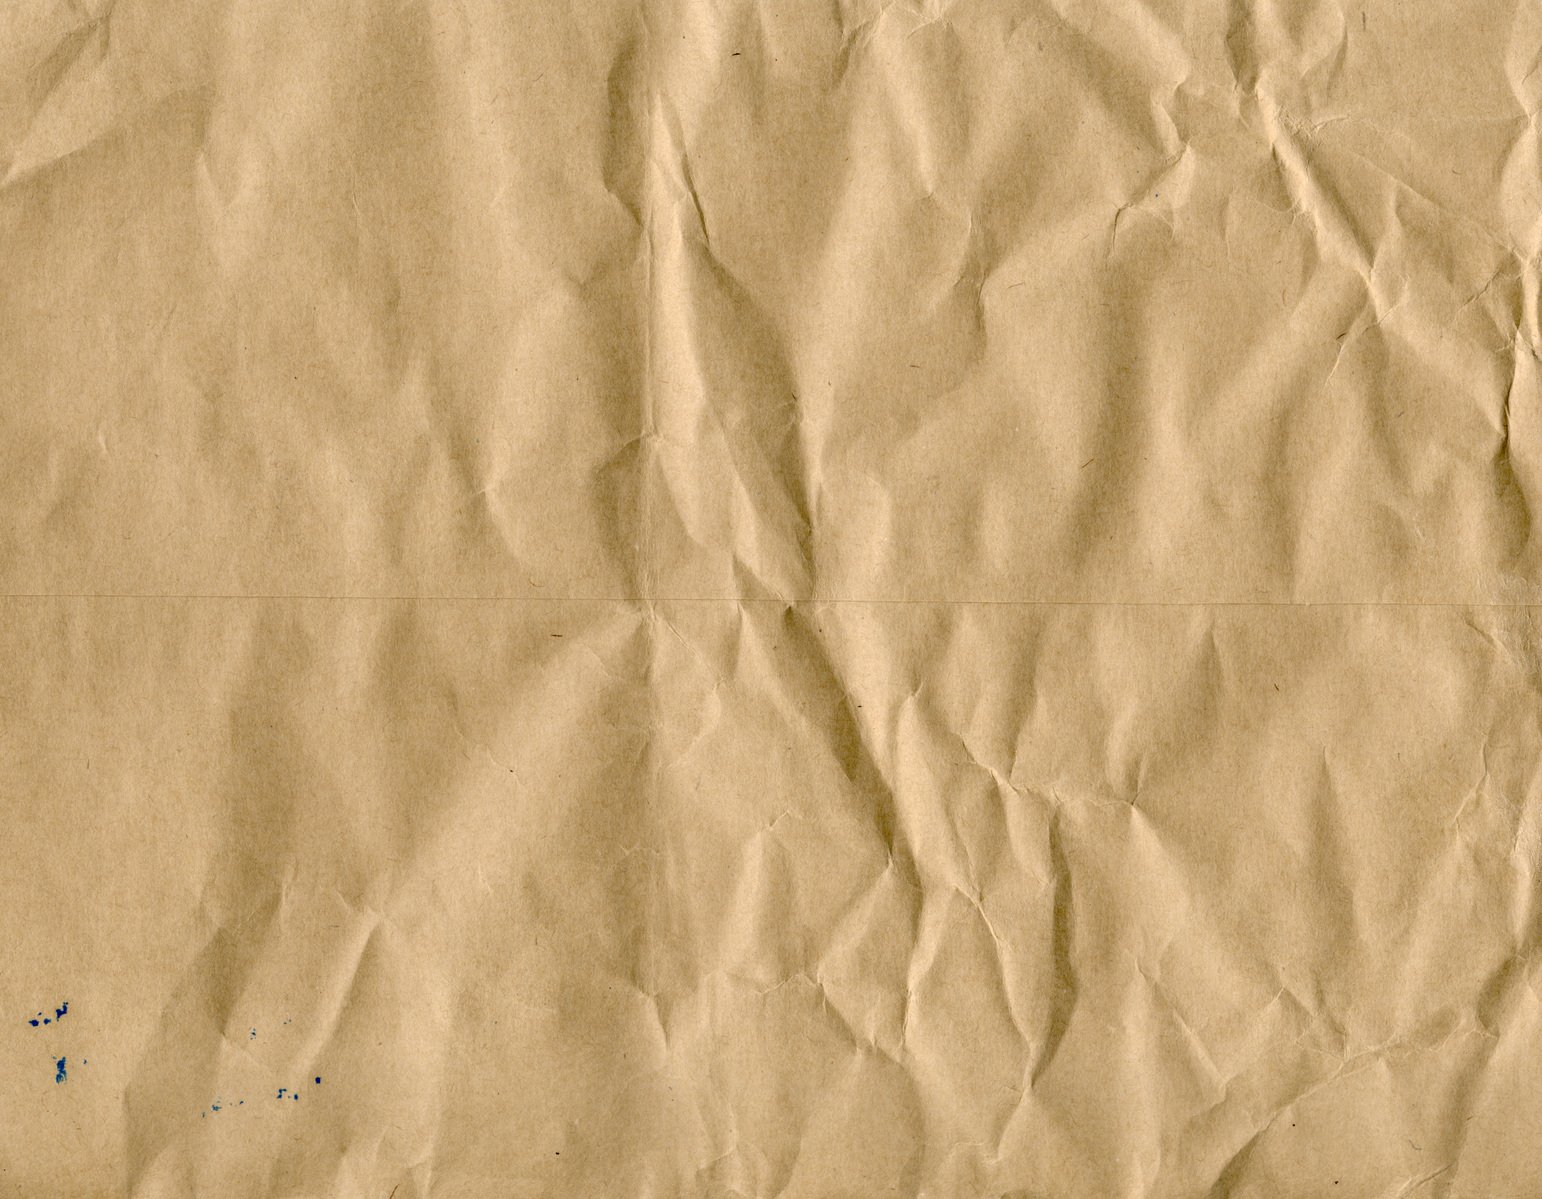 this crumpled brown paper contains some blue specks